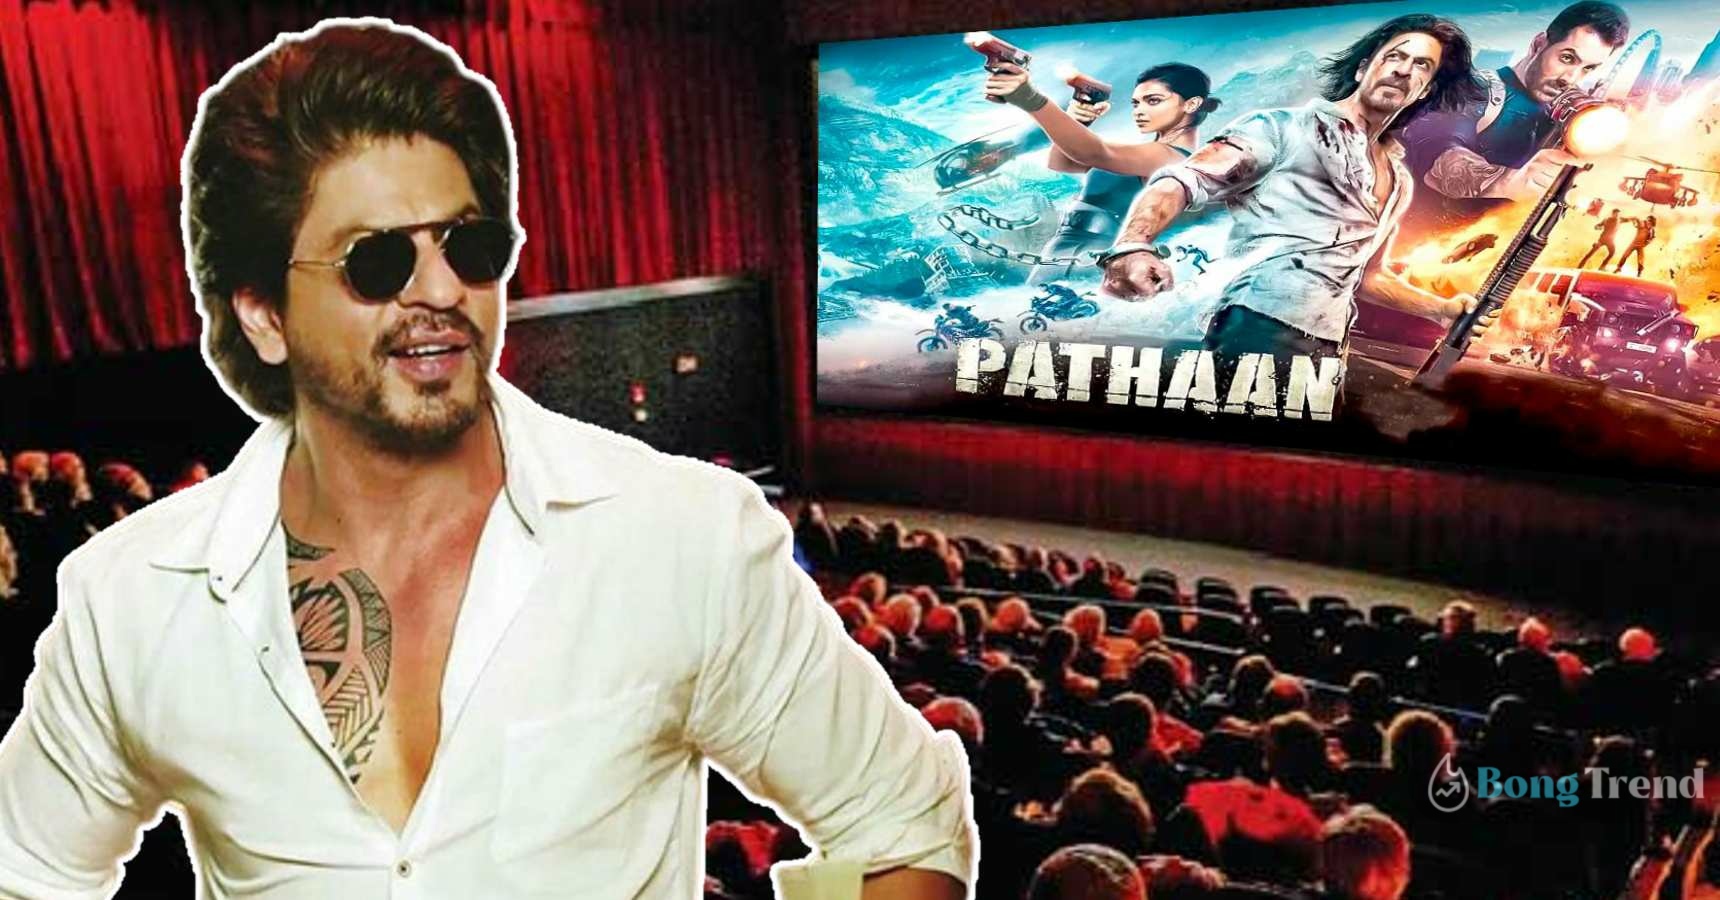 Shahrukh Khan pathaan Makes record in Pre Booking makes record revenue selling 2.5 lakh tickets